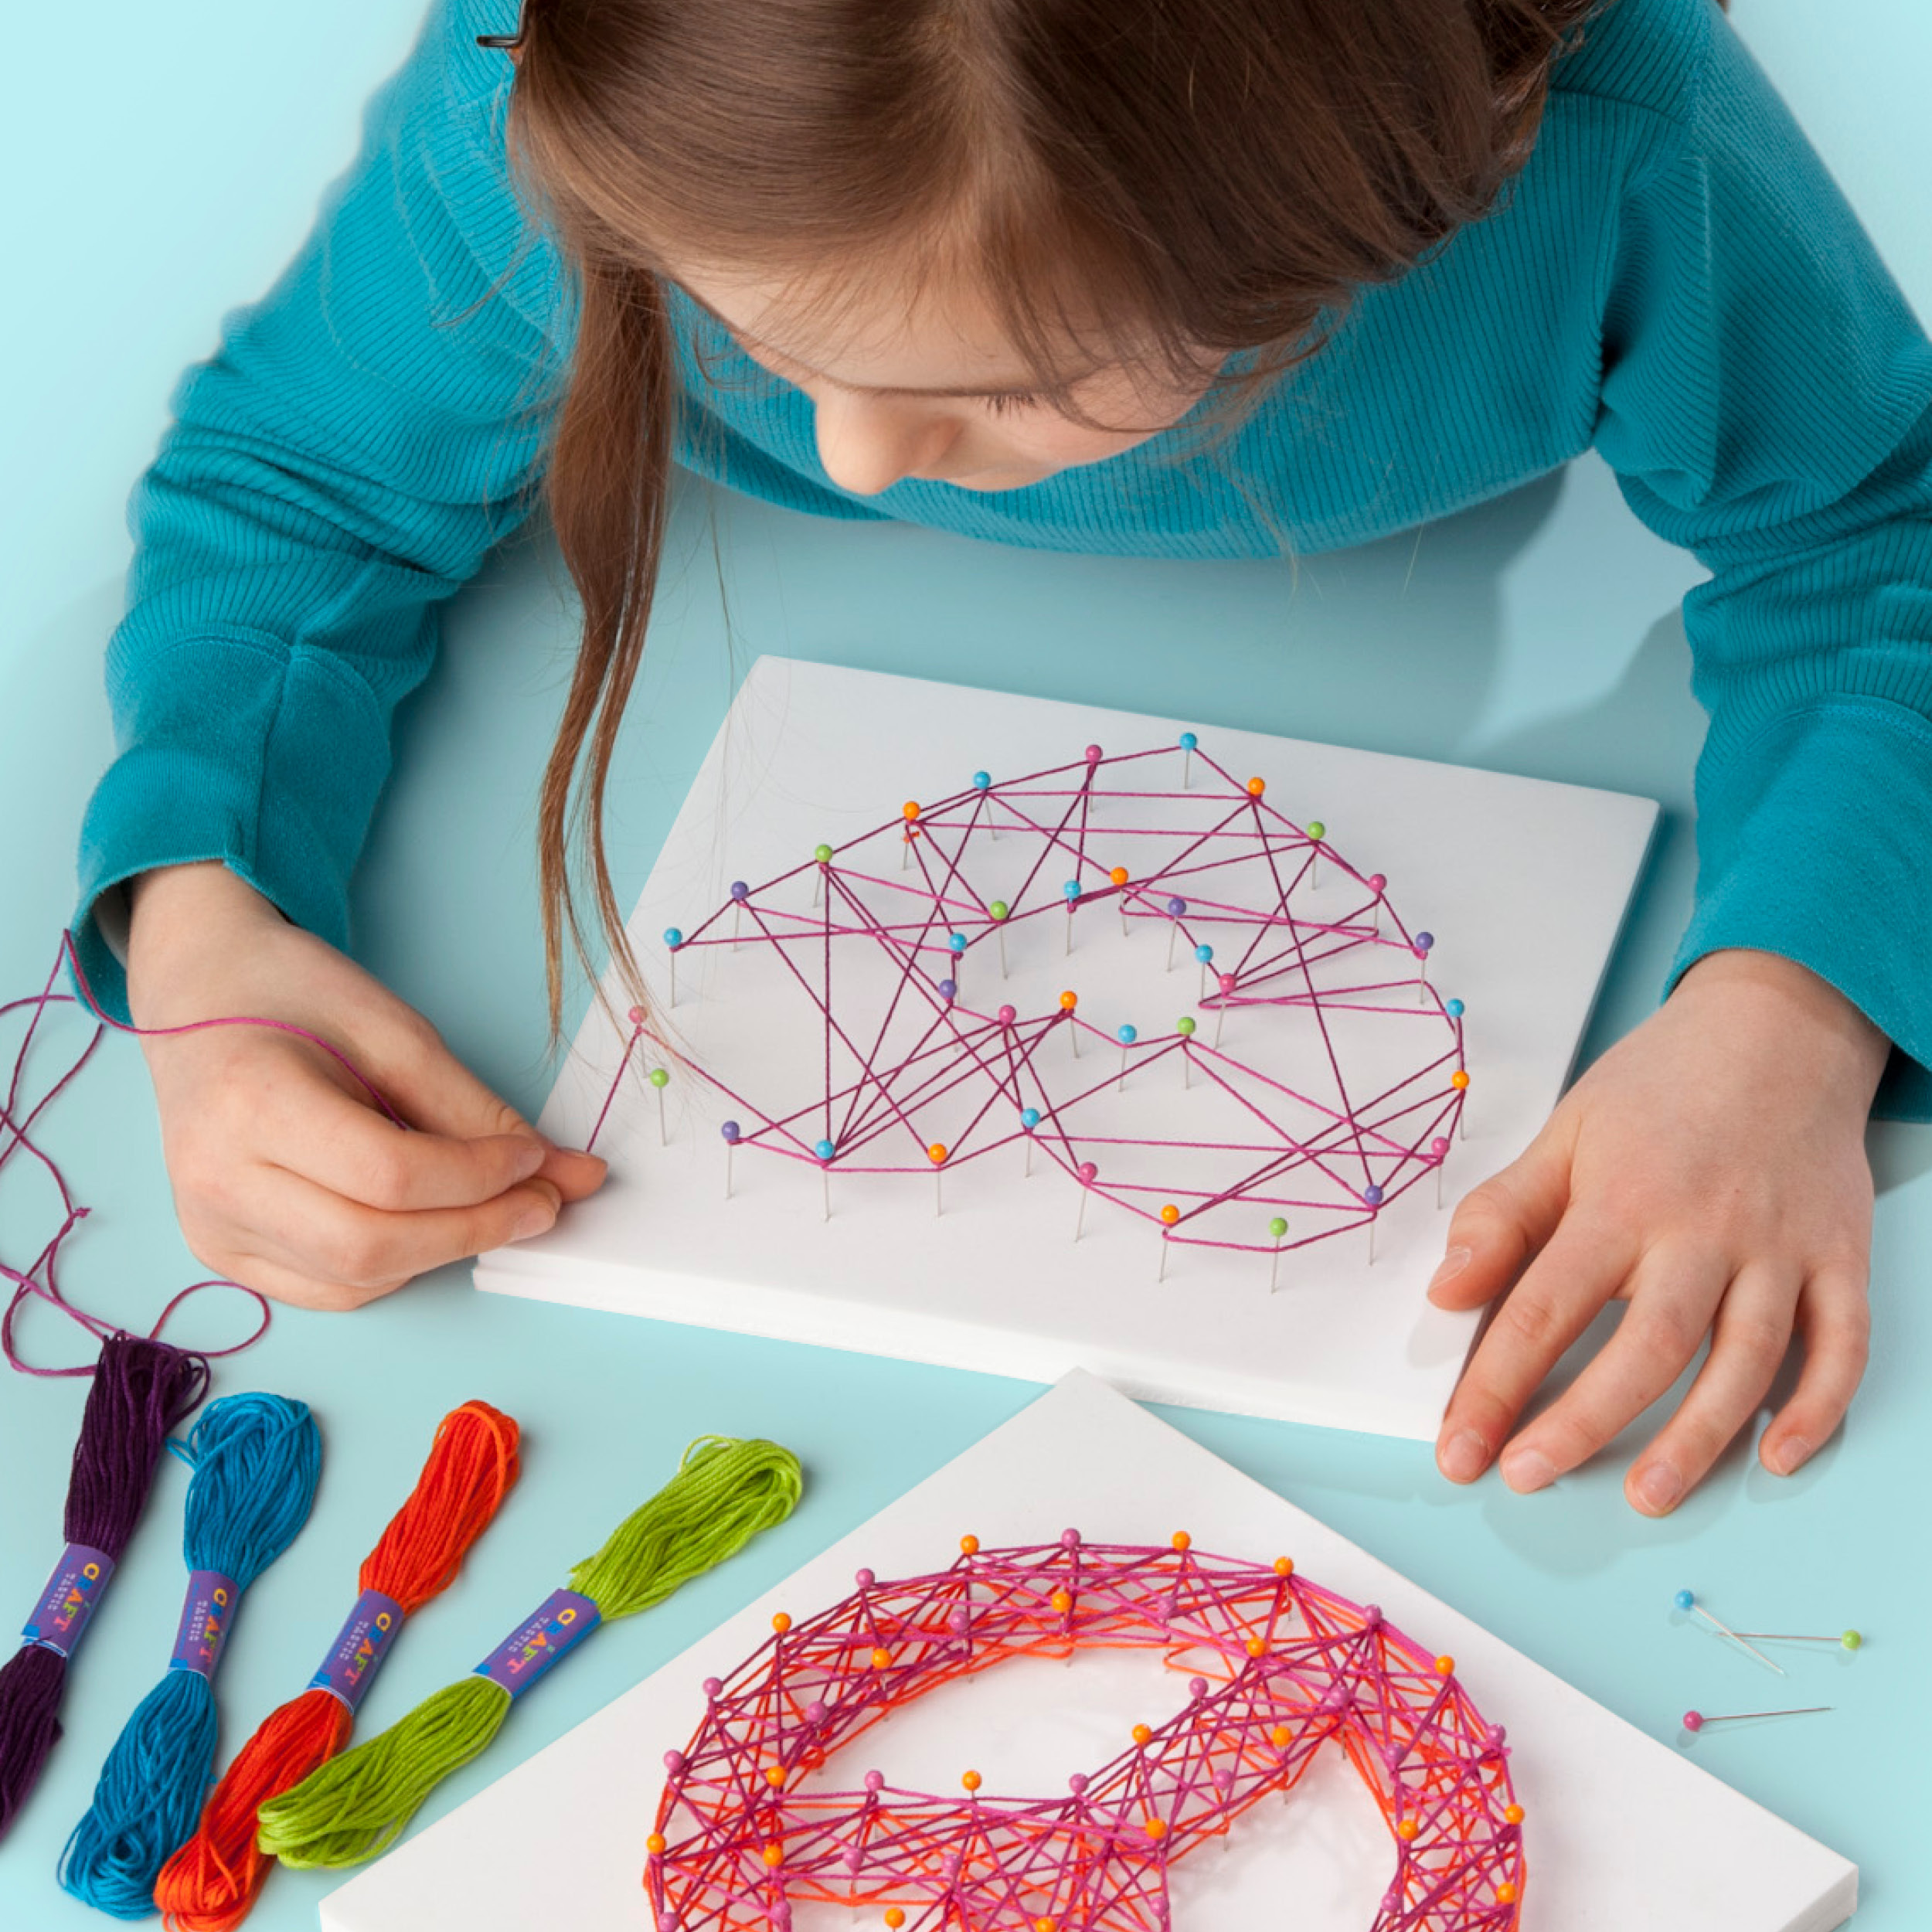 The Best Art, Craft & Science Kits for Girls